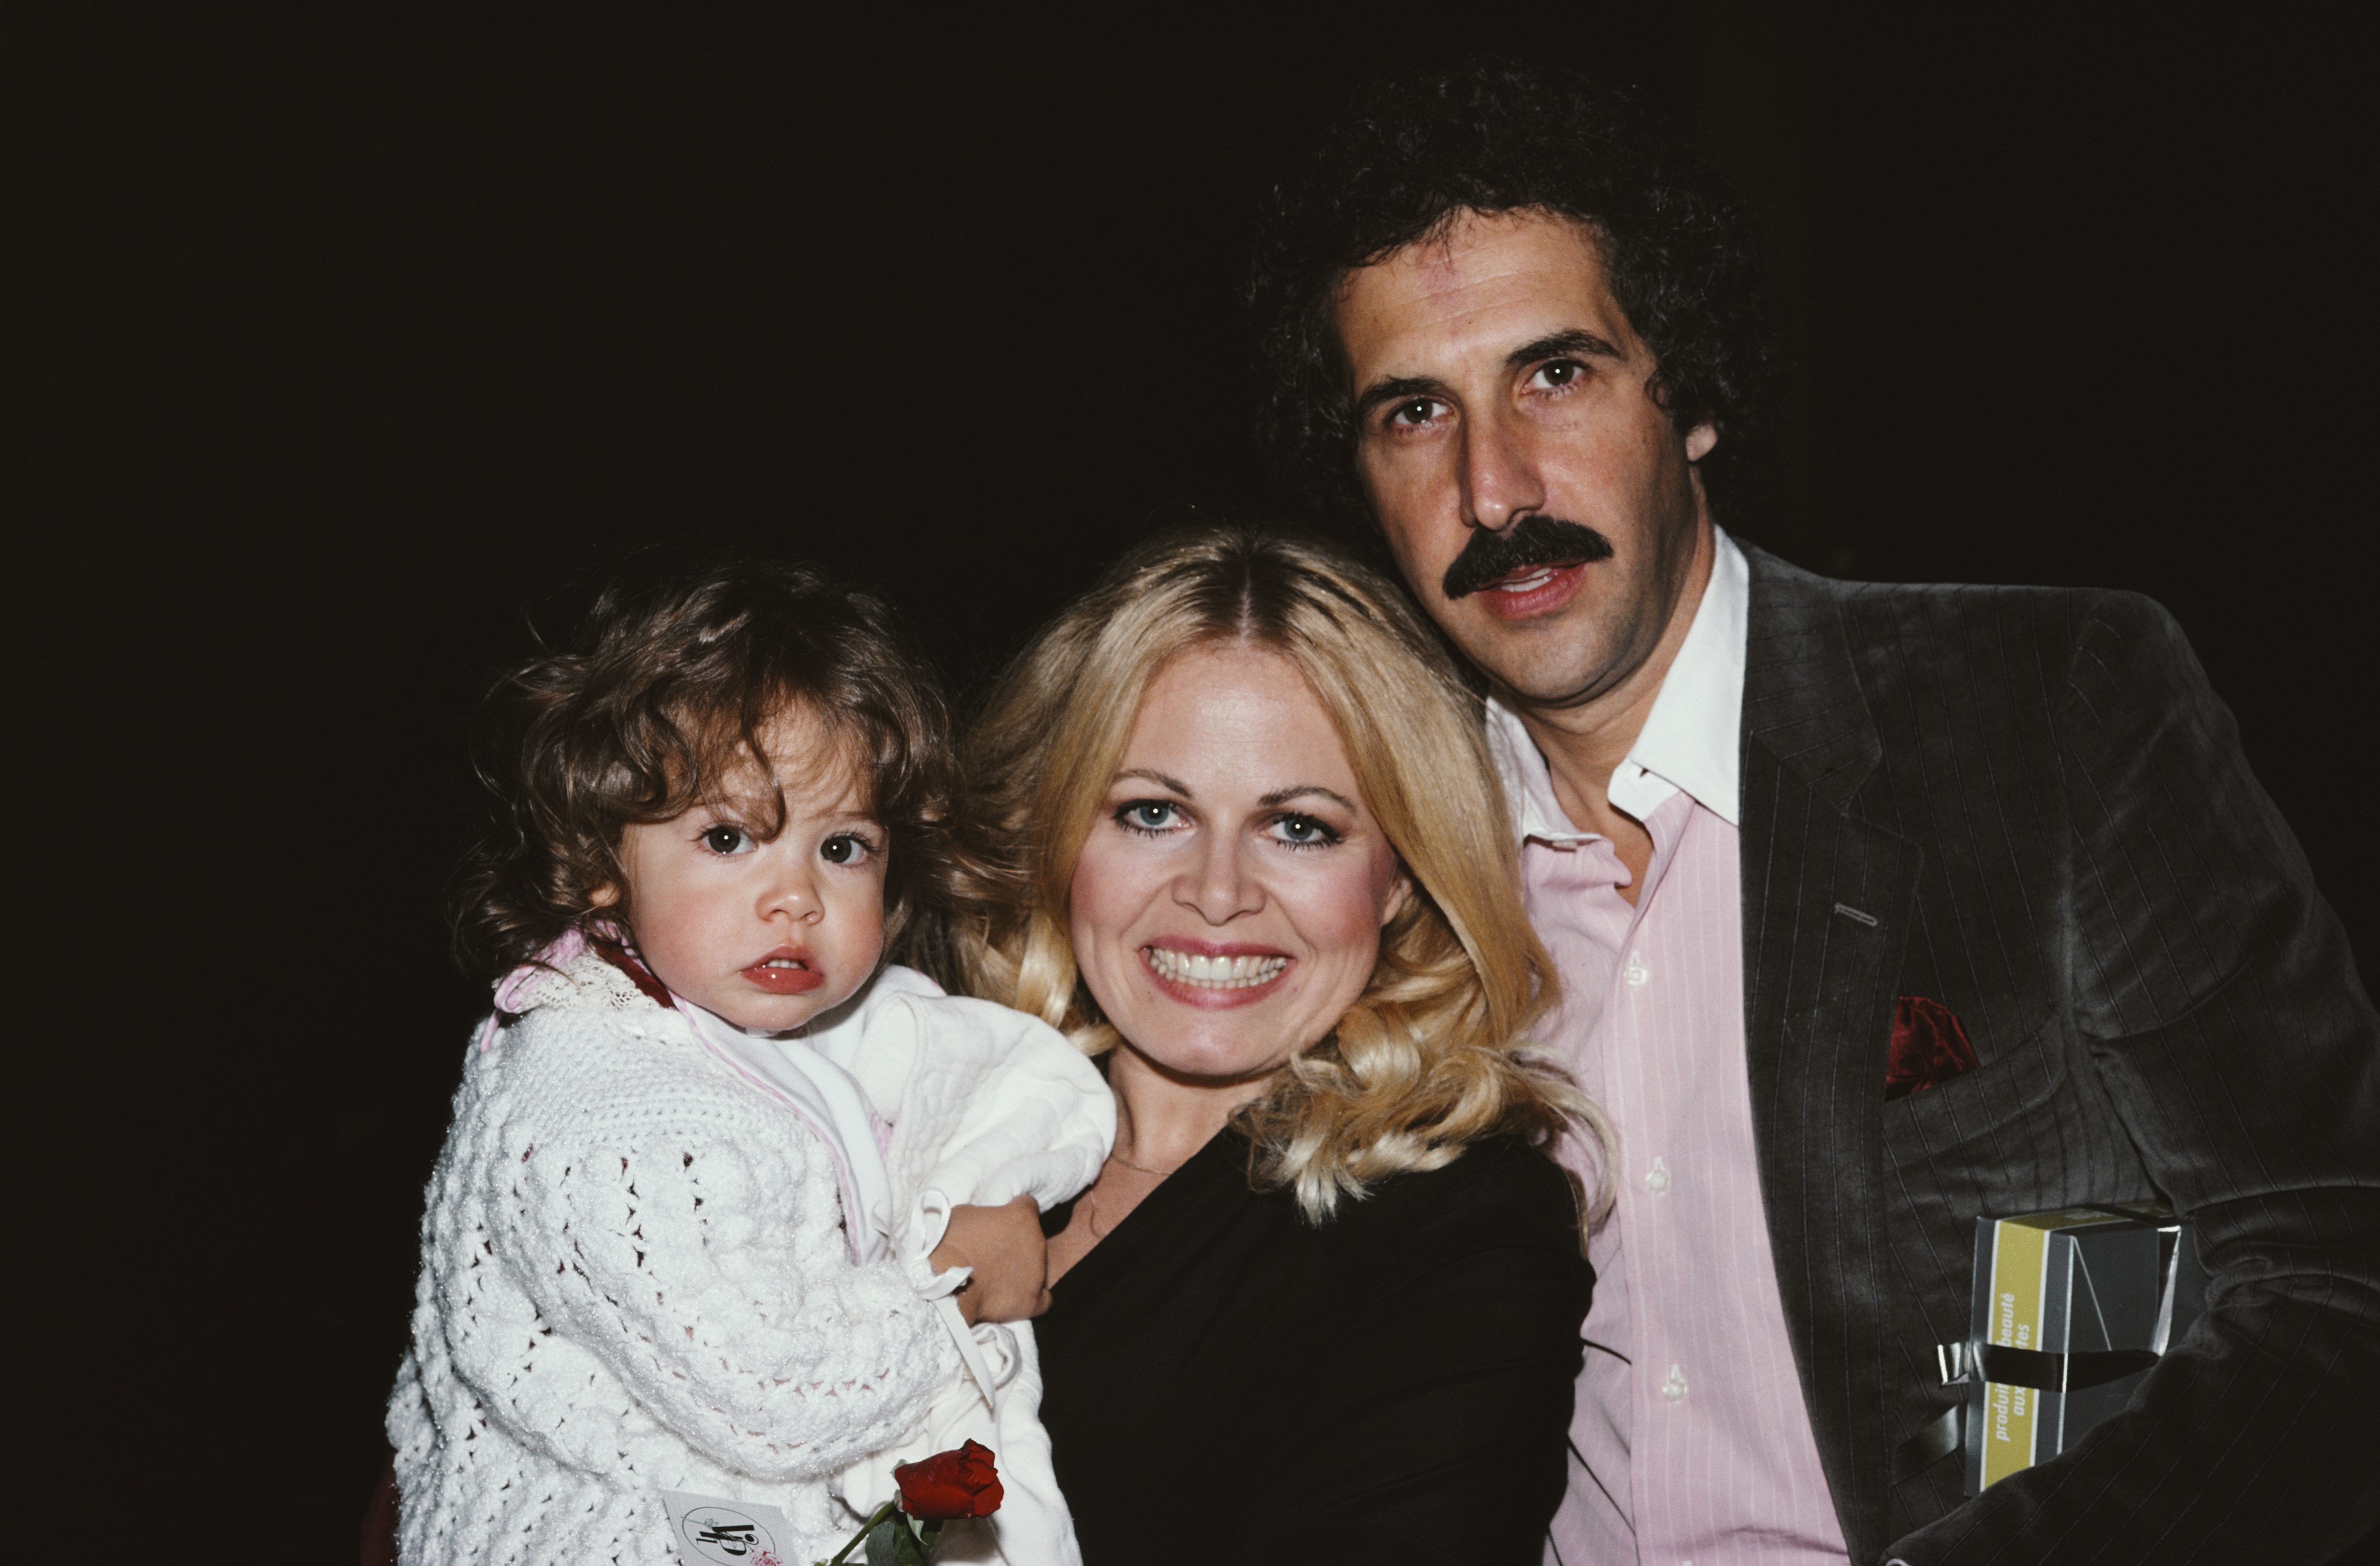 Sally Struthers and William C. Rader with heir daughter Samantha Struthers Rader in December 1980. | Source: Getty Images